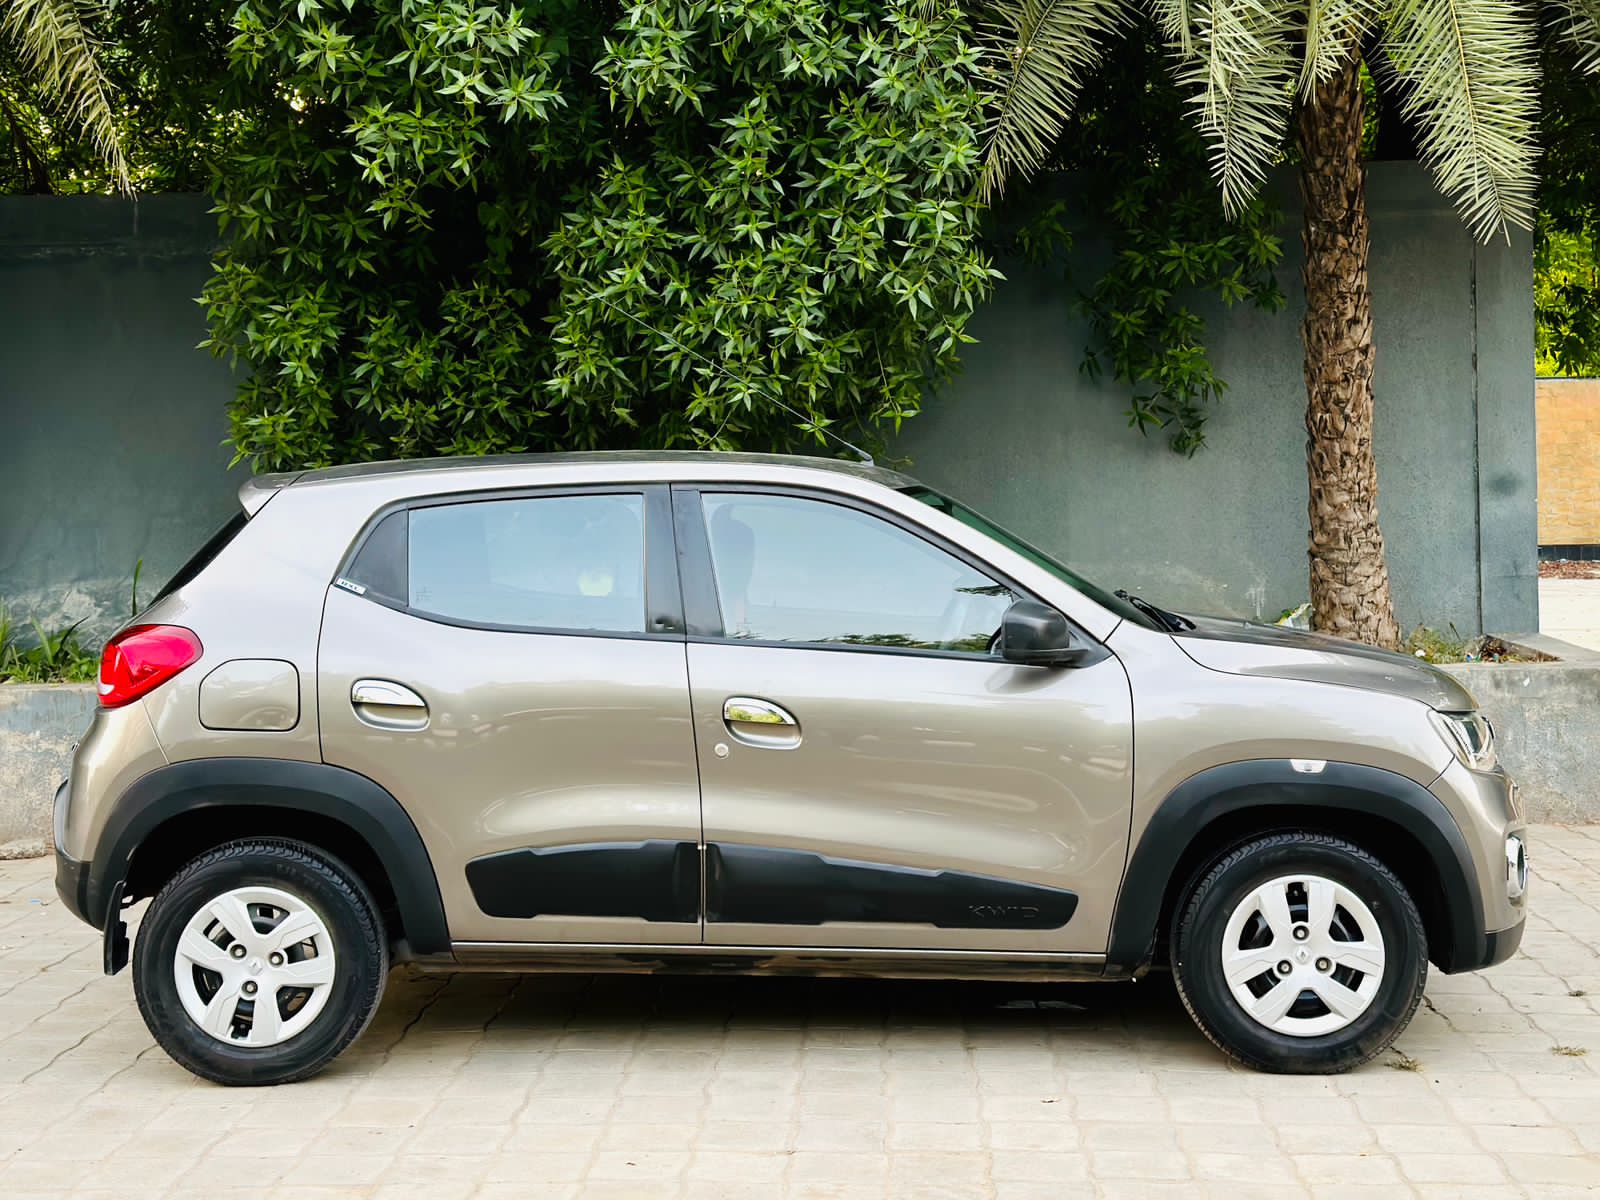 Details View - Renault KWID photos - reseller,reseller marketplace,advetising your products,reseller bazzar,resellerbazzar.in,india's classified site,Renault KWID , used Renault KWID , old Renault KWID , old Renault KWID  in Vadodara , Renault KWID  in Vadodara